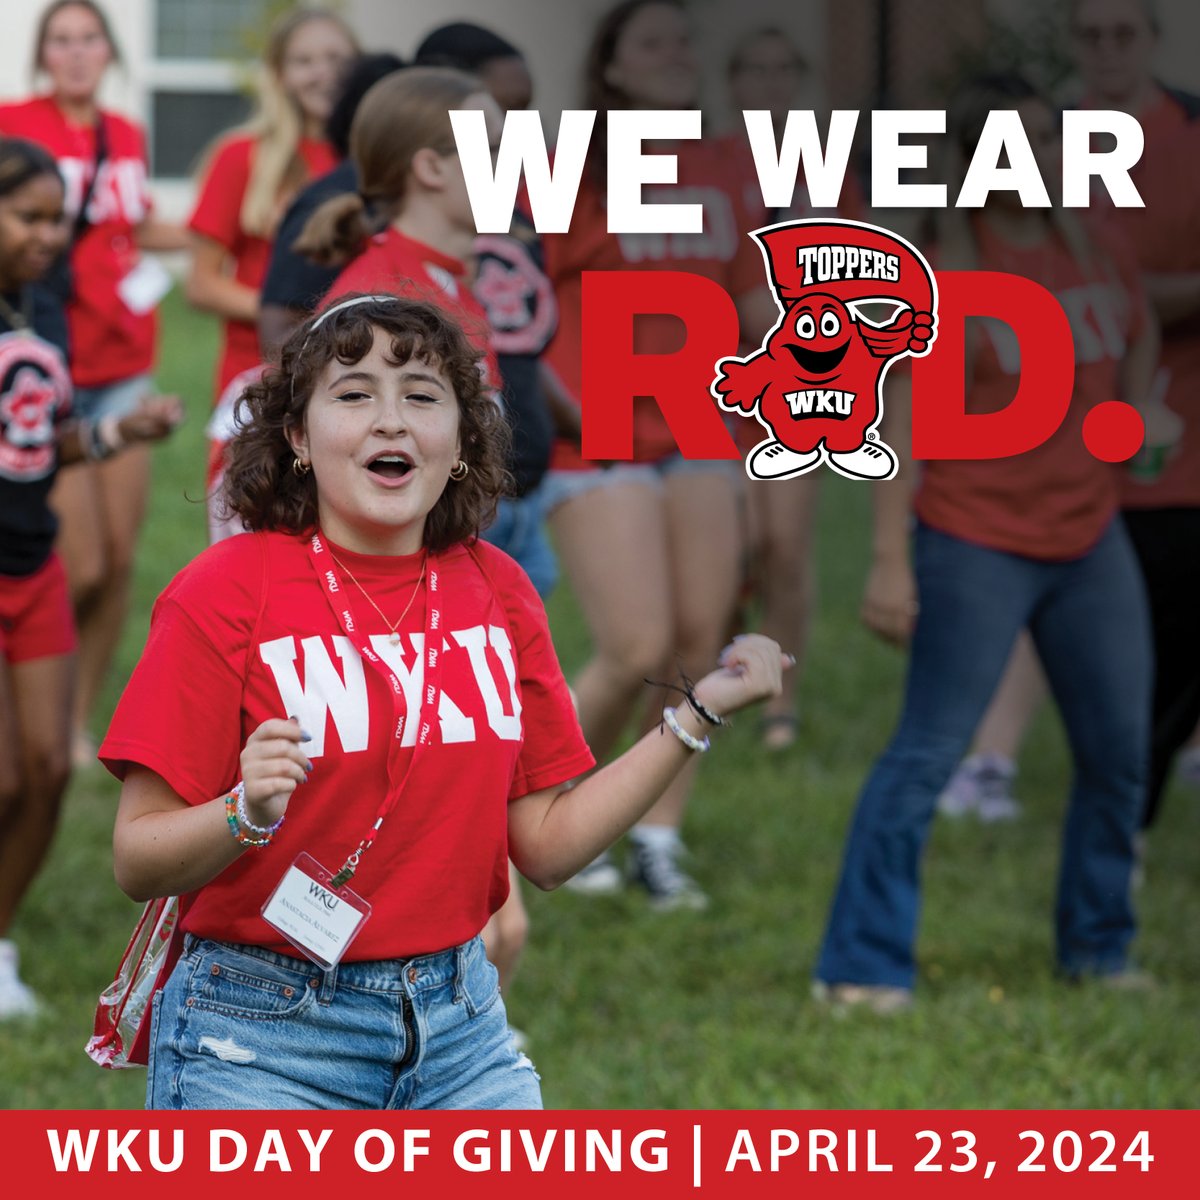 🔴 Tomorrow is @wku Day of Giving. Don’t forget to wear red! #WKUDayofGiving